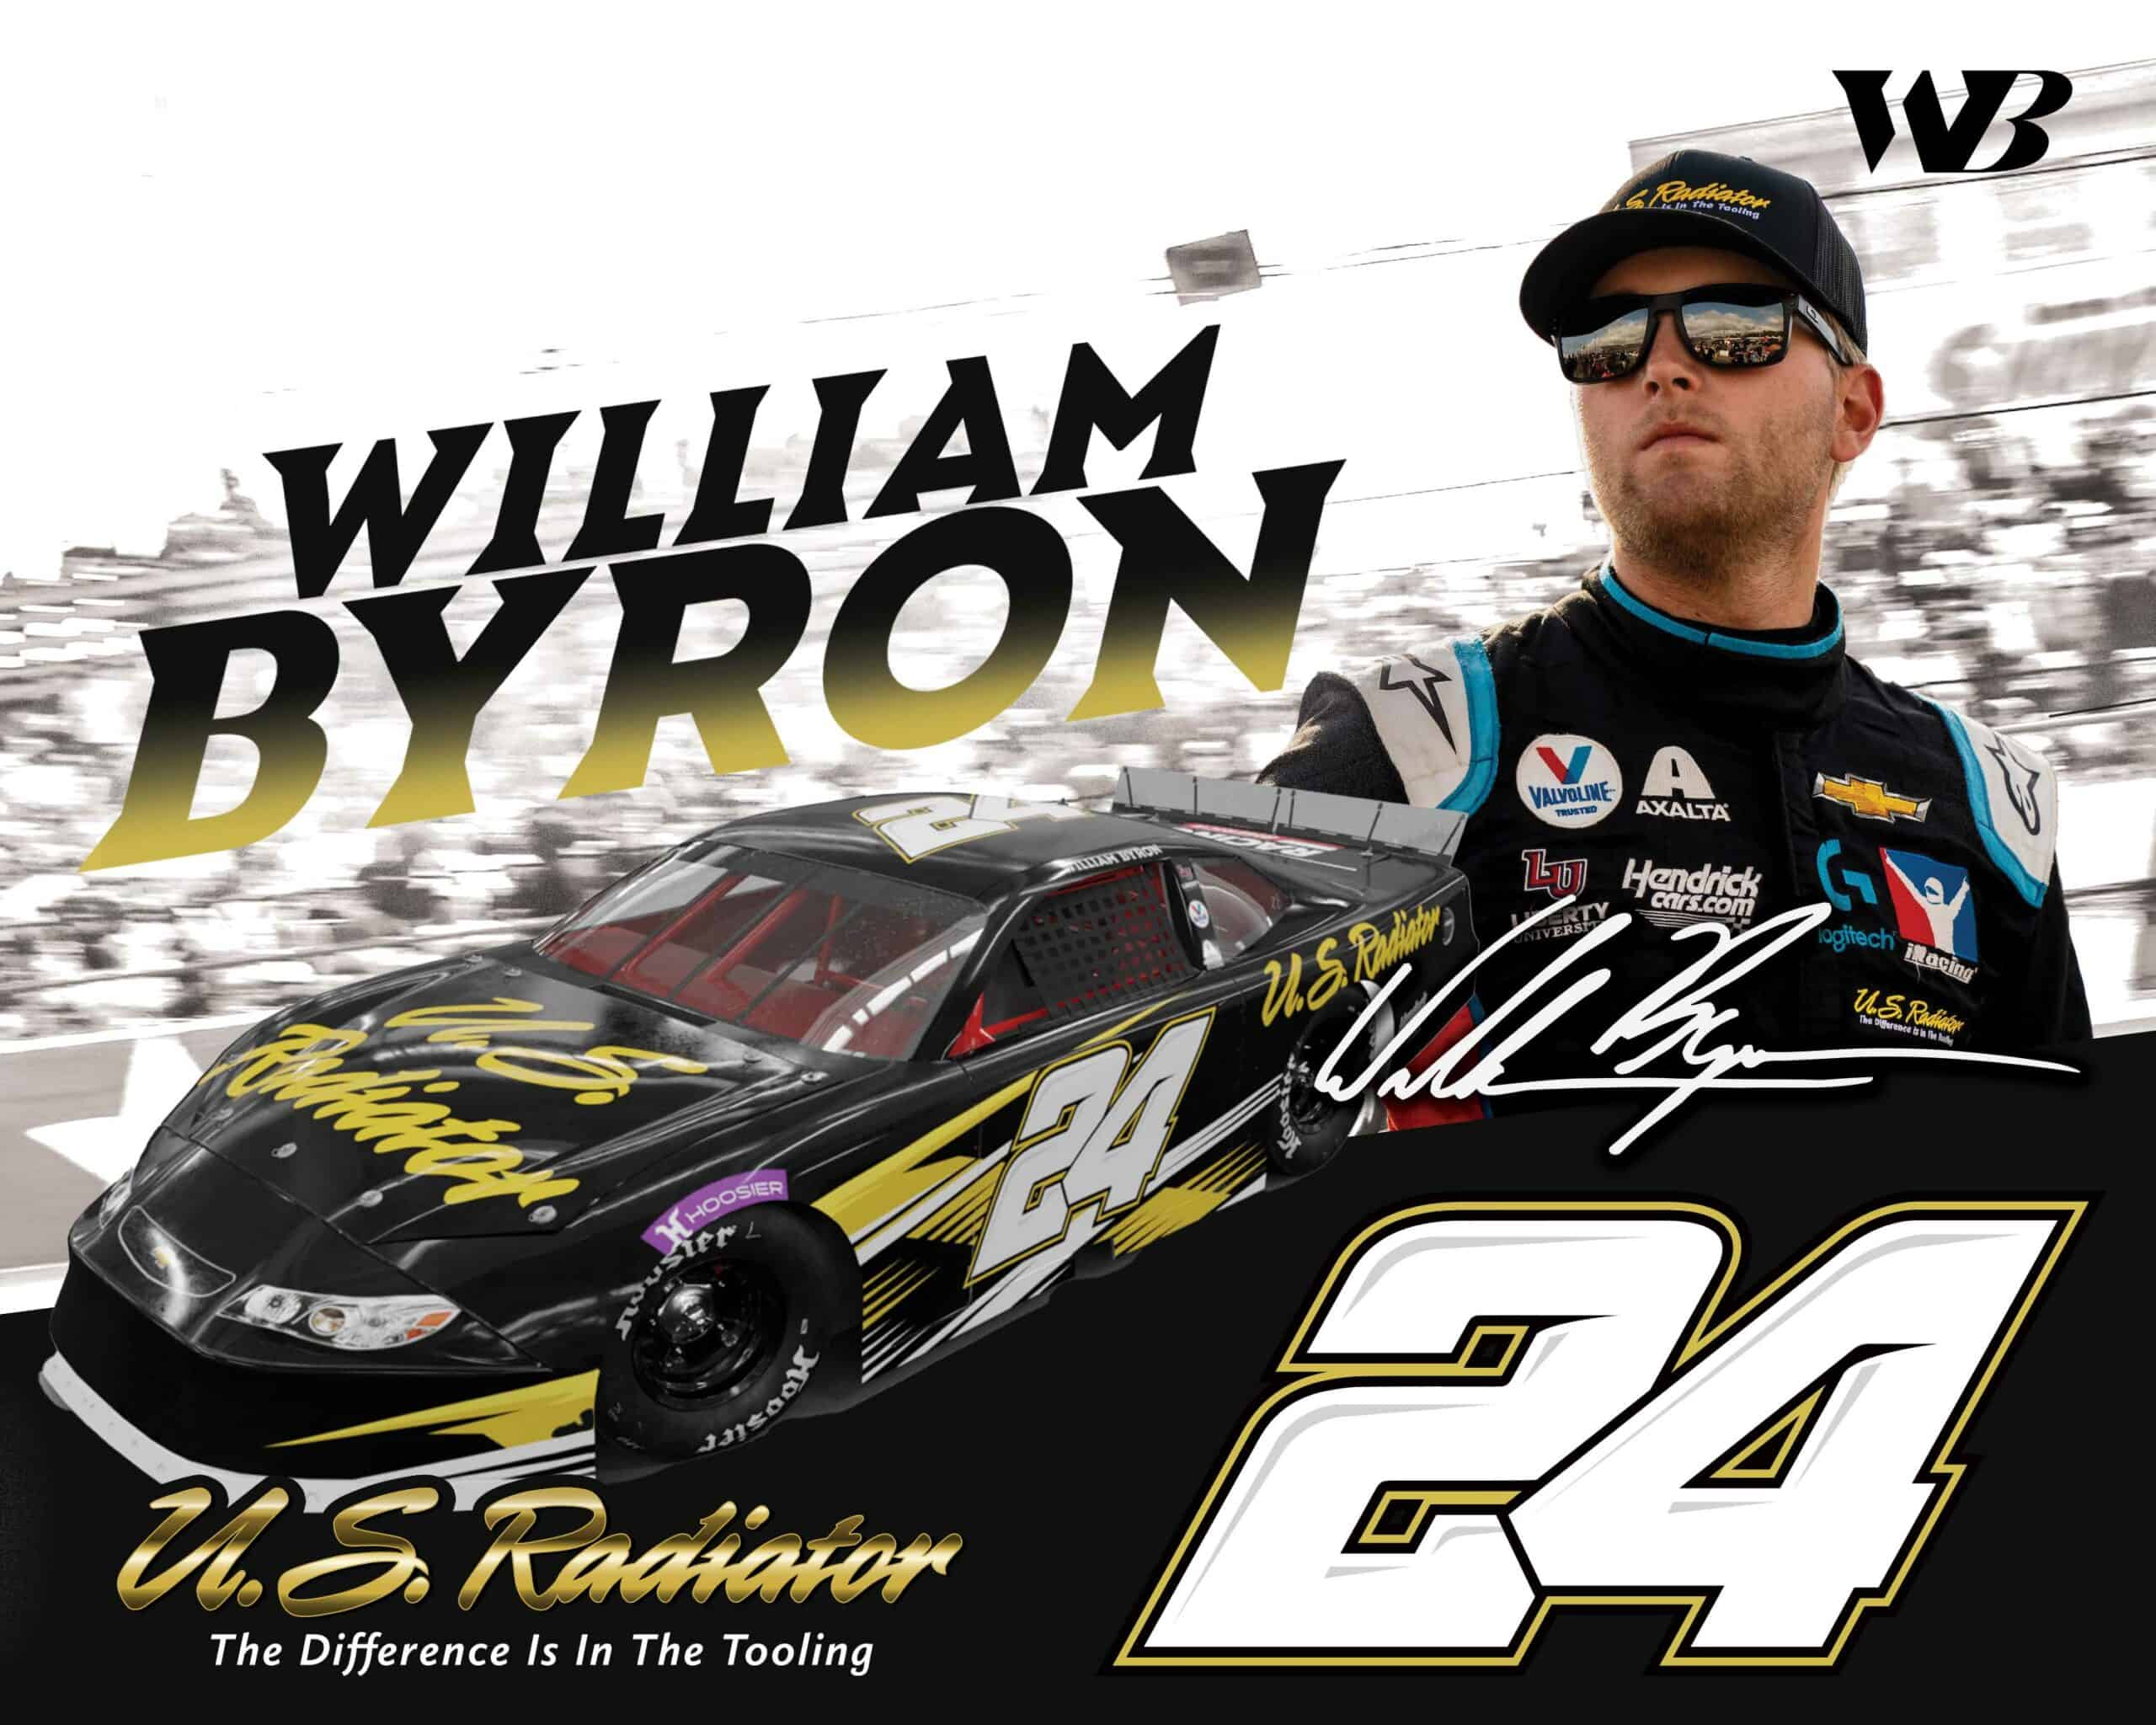 Featured image for “William Byron Returns to Berlin Raceway in the No. 24 U.S. Radiator Chevrolet”